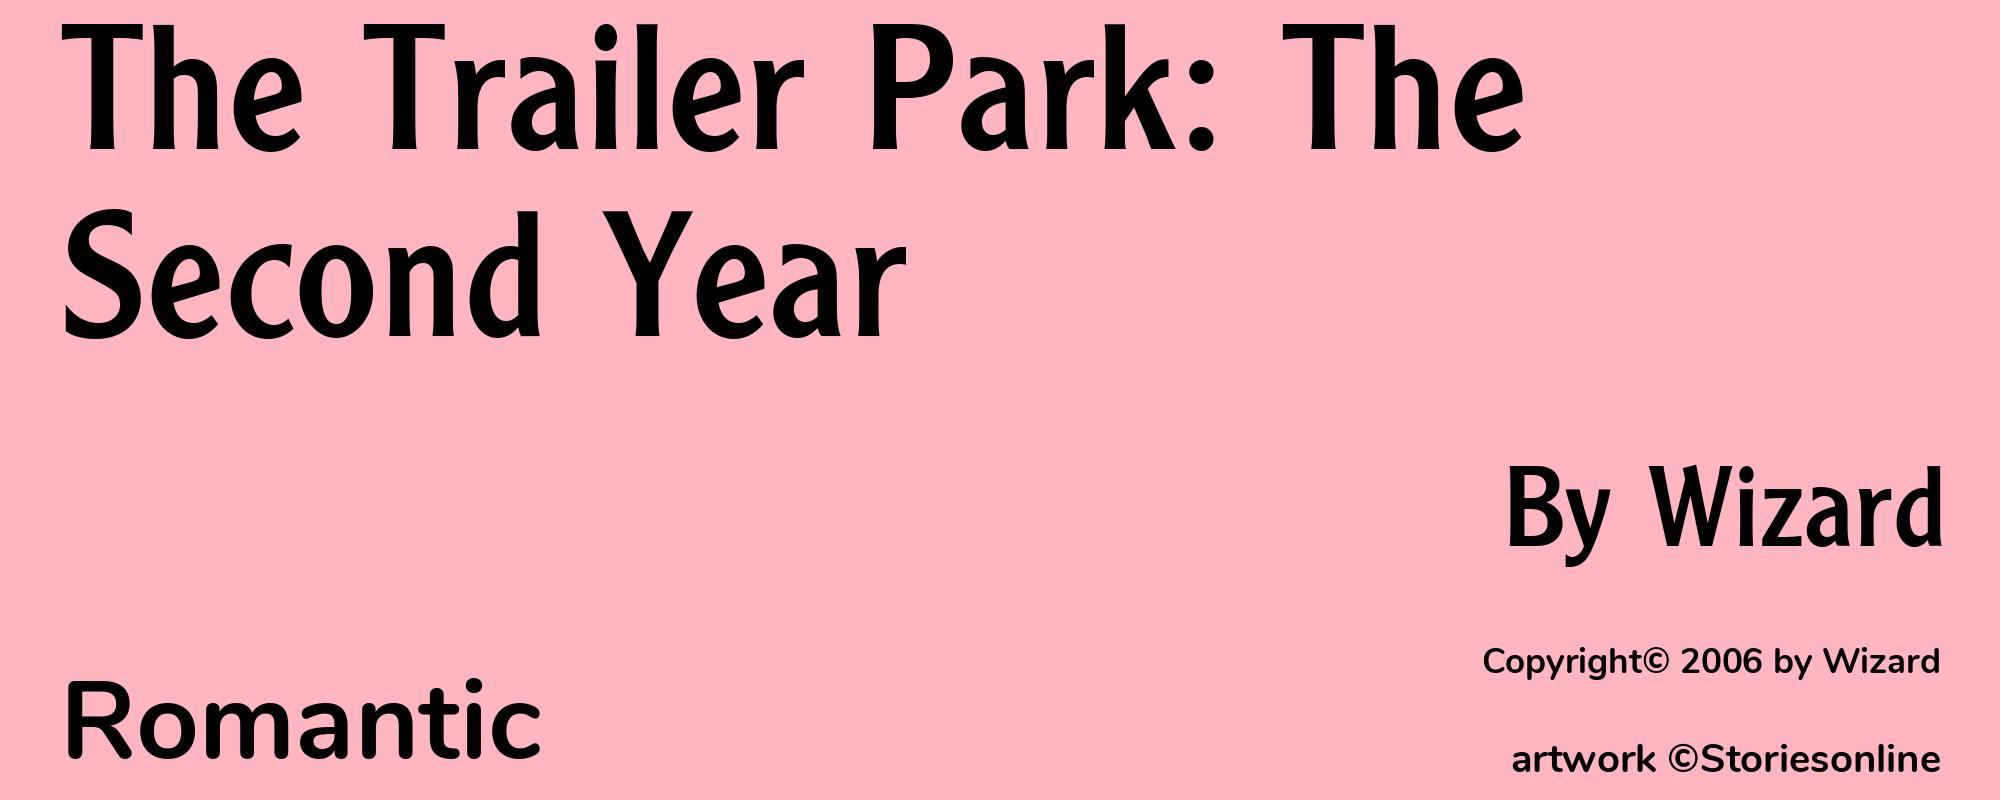 The Trailer Park: The Second Year - Cover